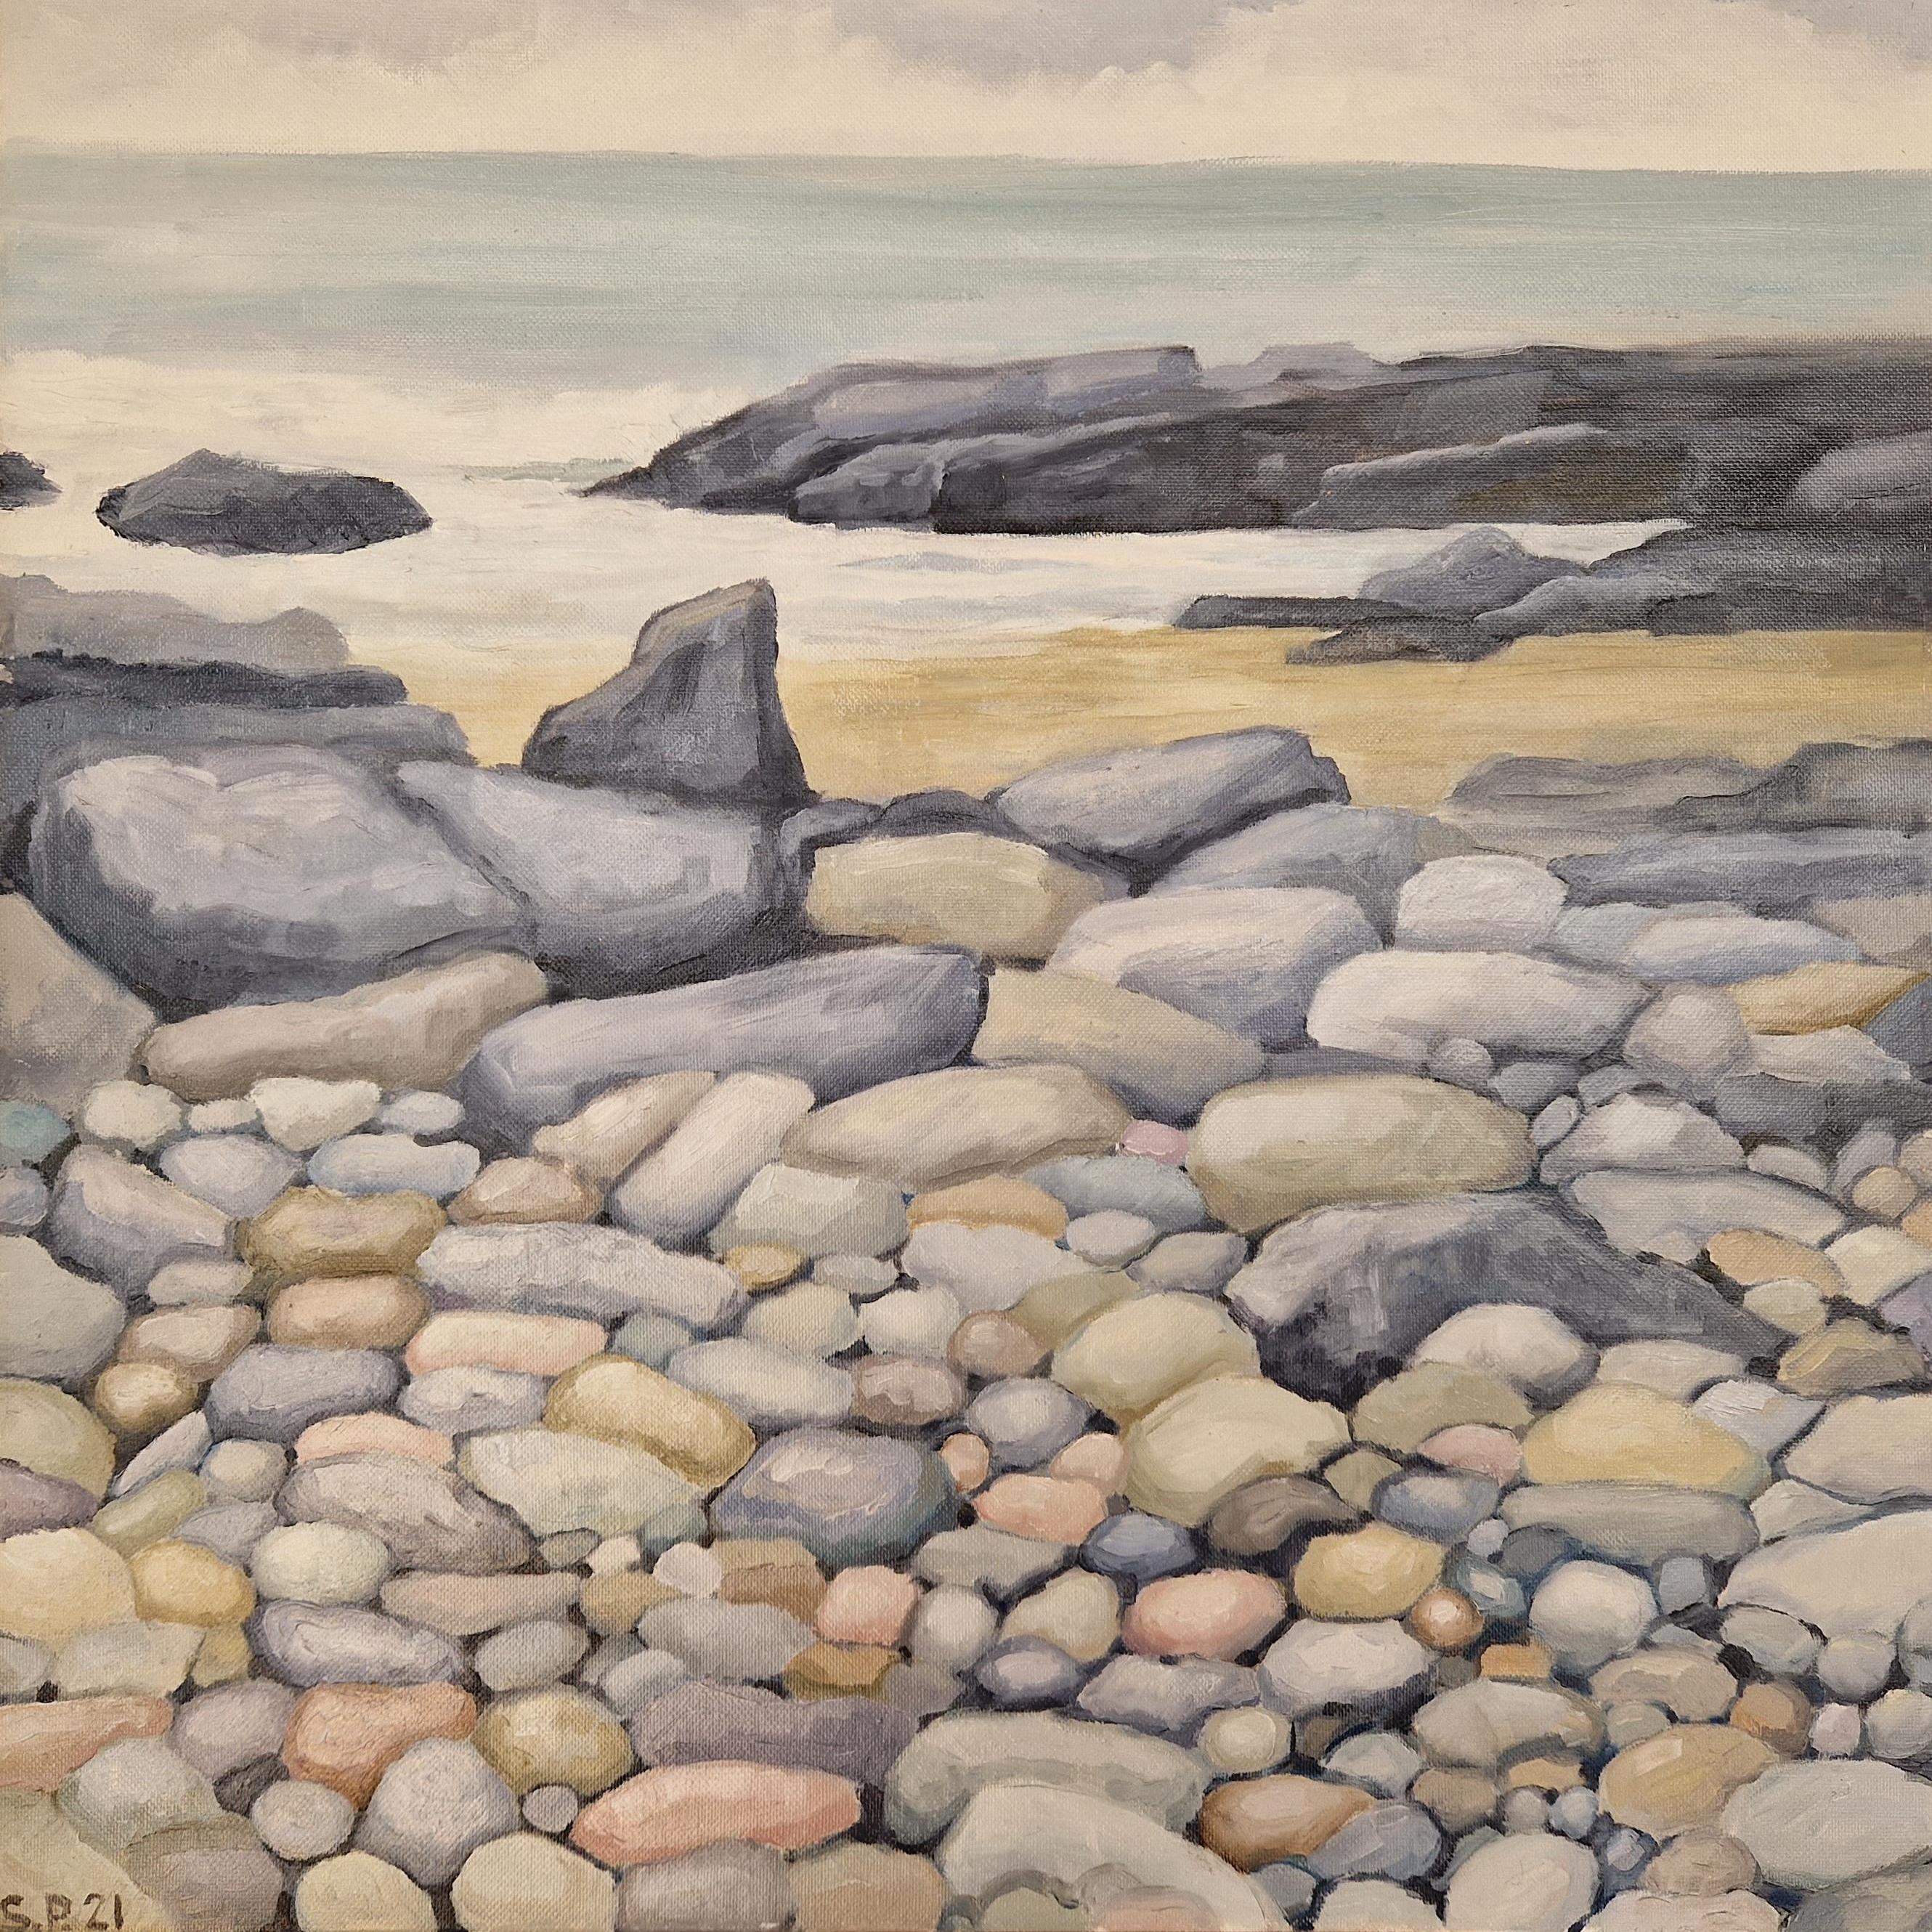 The painting 'Fanore Beach'.